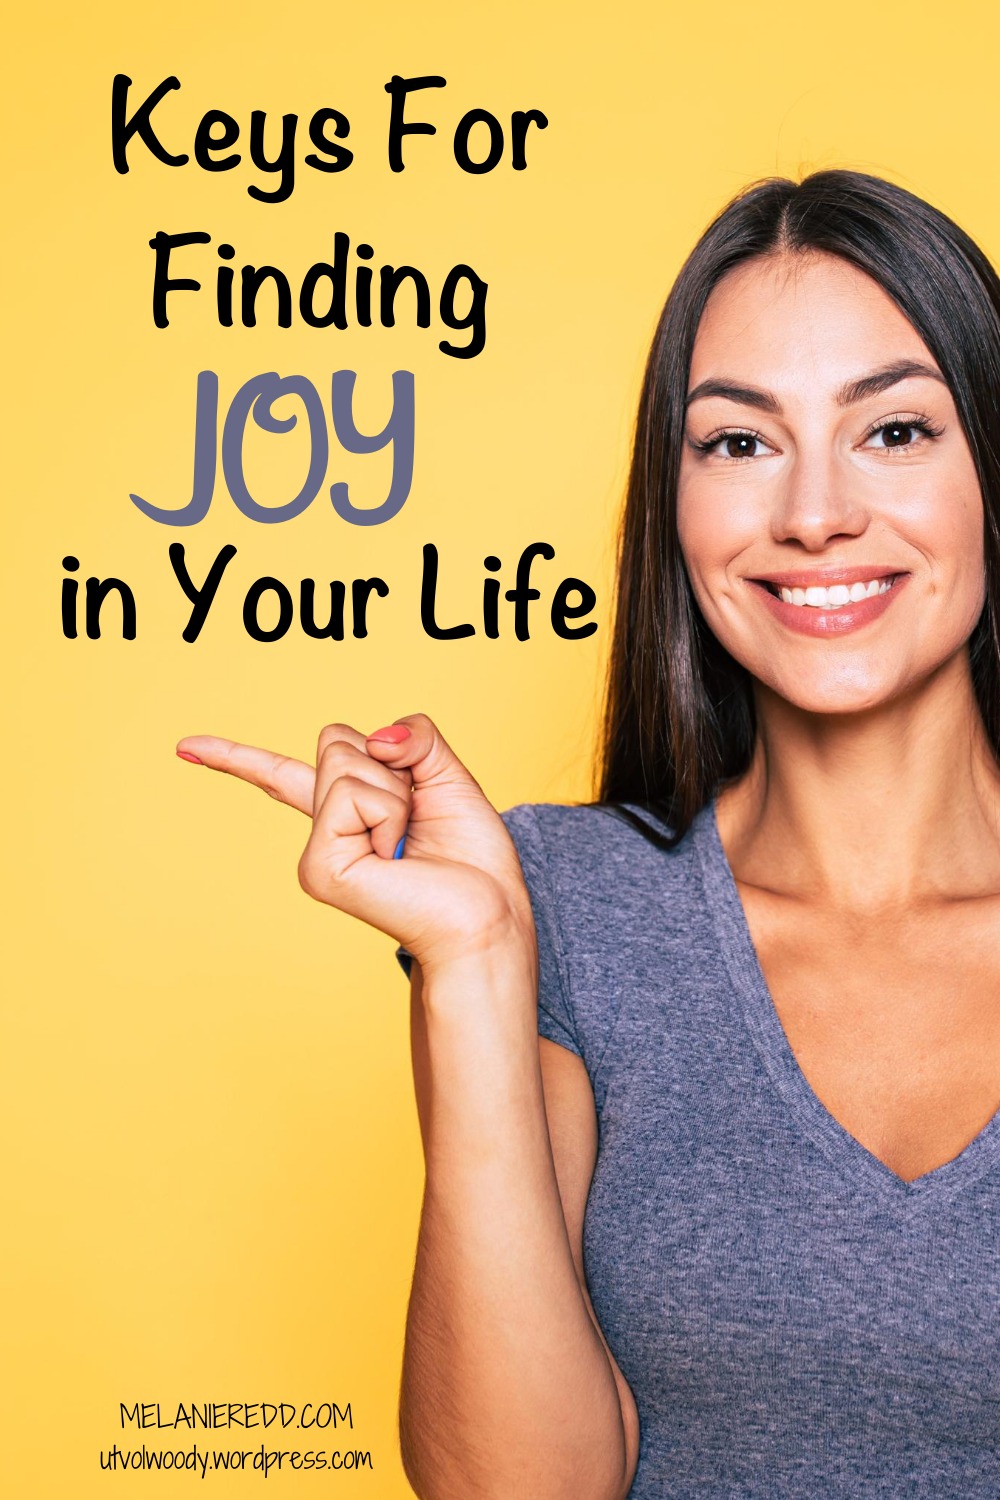 There is so much that challenges the joy in our lives. How can we stay full of joy? Here are keys for finding joy in your life. Why not drop by to check them out? #joy #realjoy #truejoy #encouragement